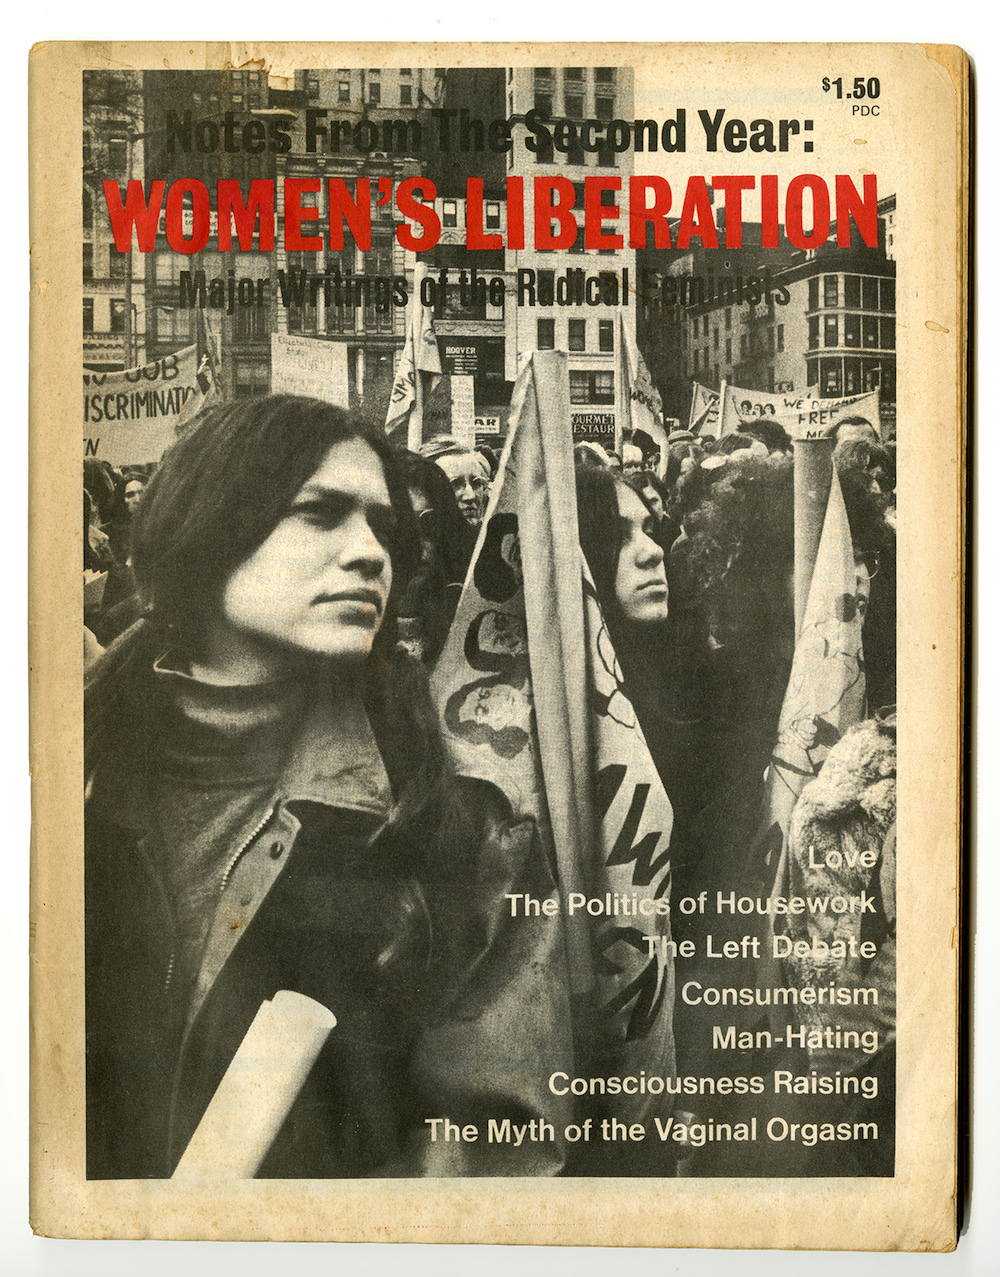  Cover of  Notes from the Second Year: Women’s Liberation , 1970. 